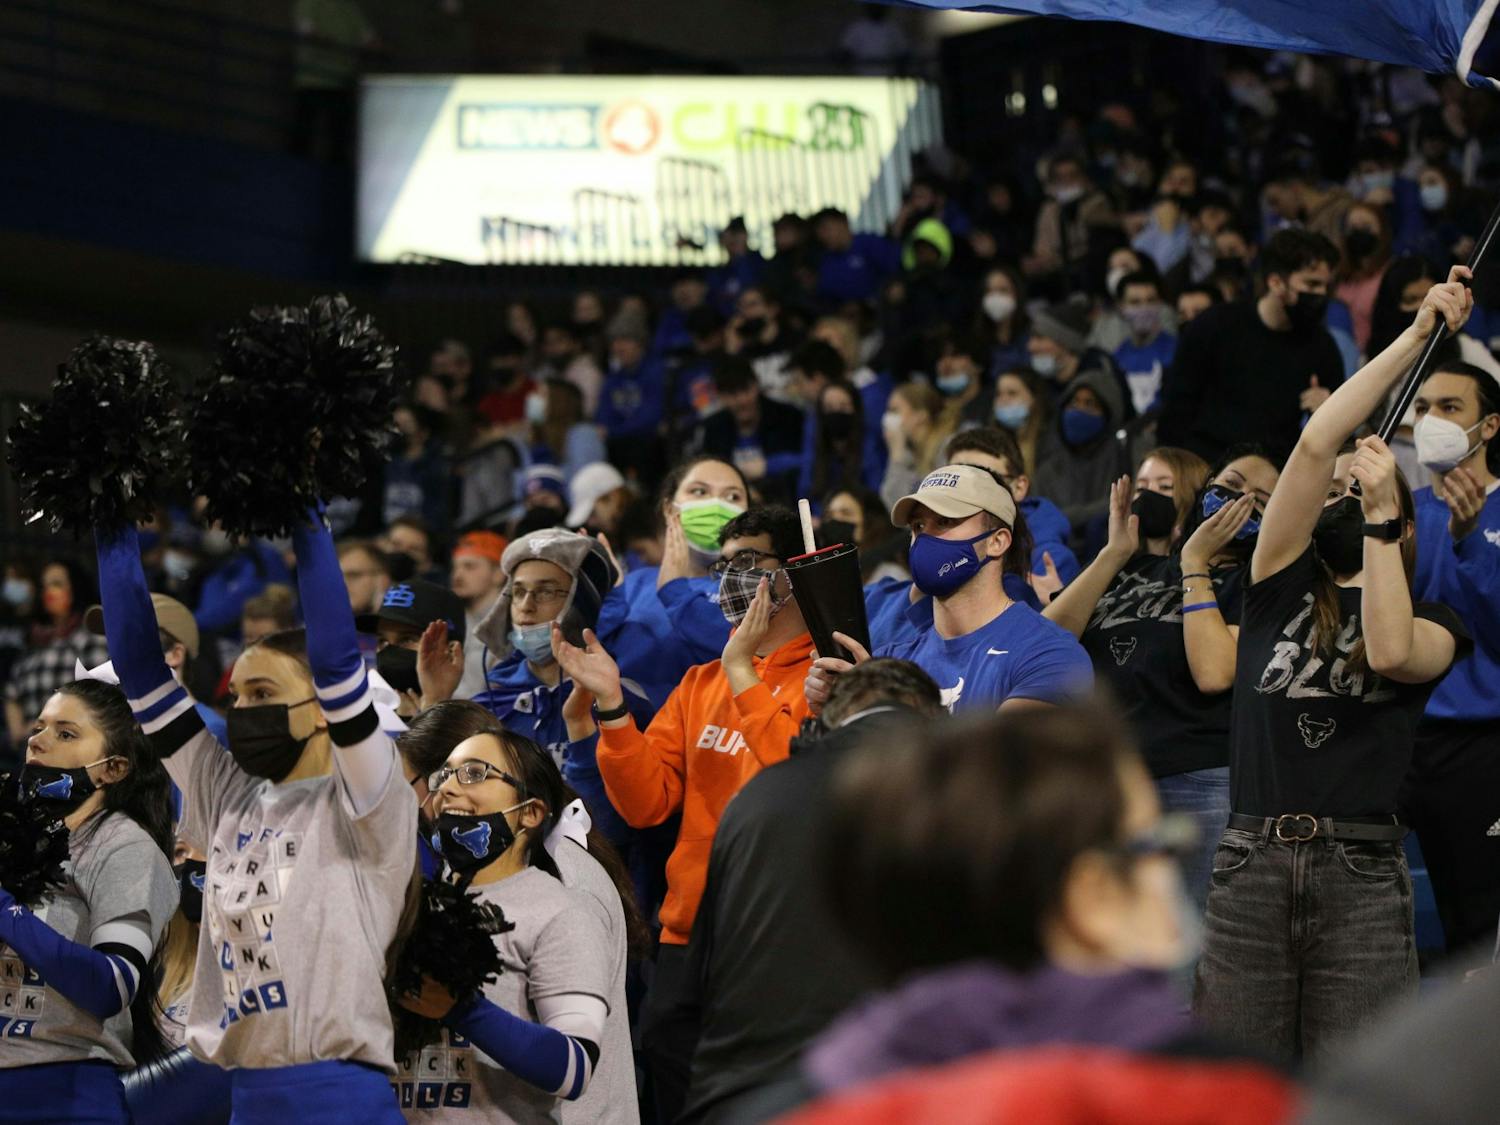 Members of the True Blue cheering section make noise during a near-sellout game against Toledo in February.